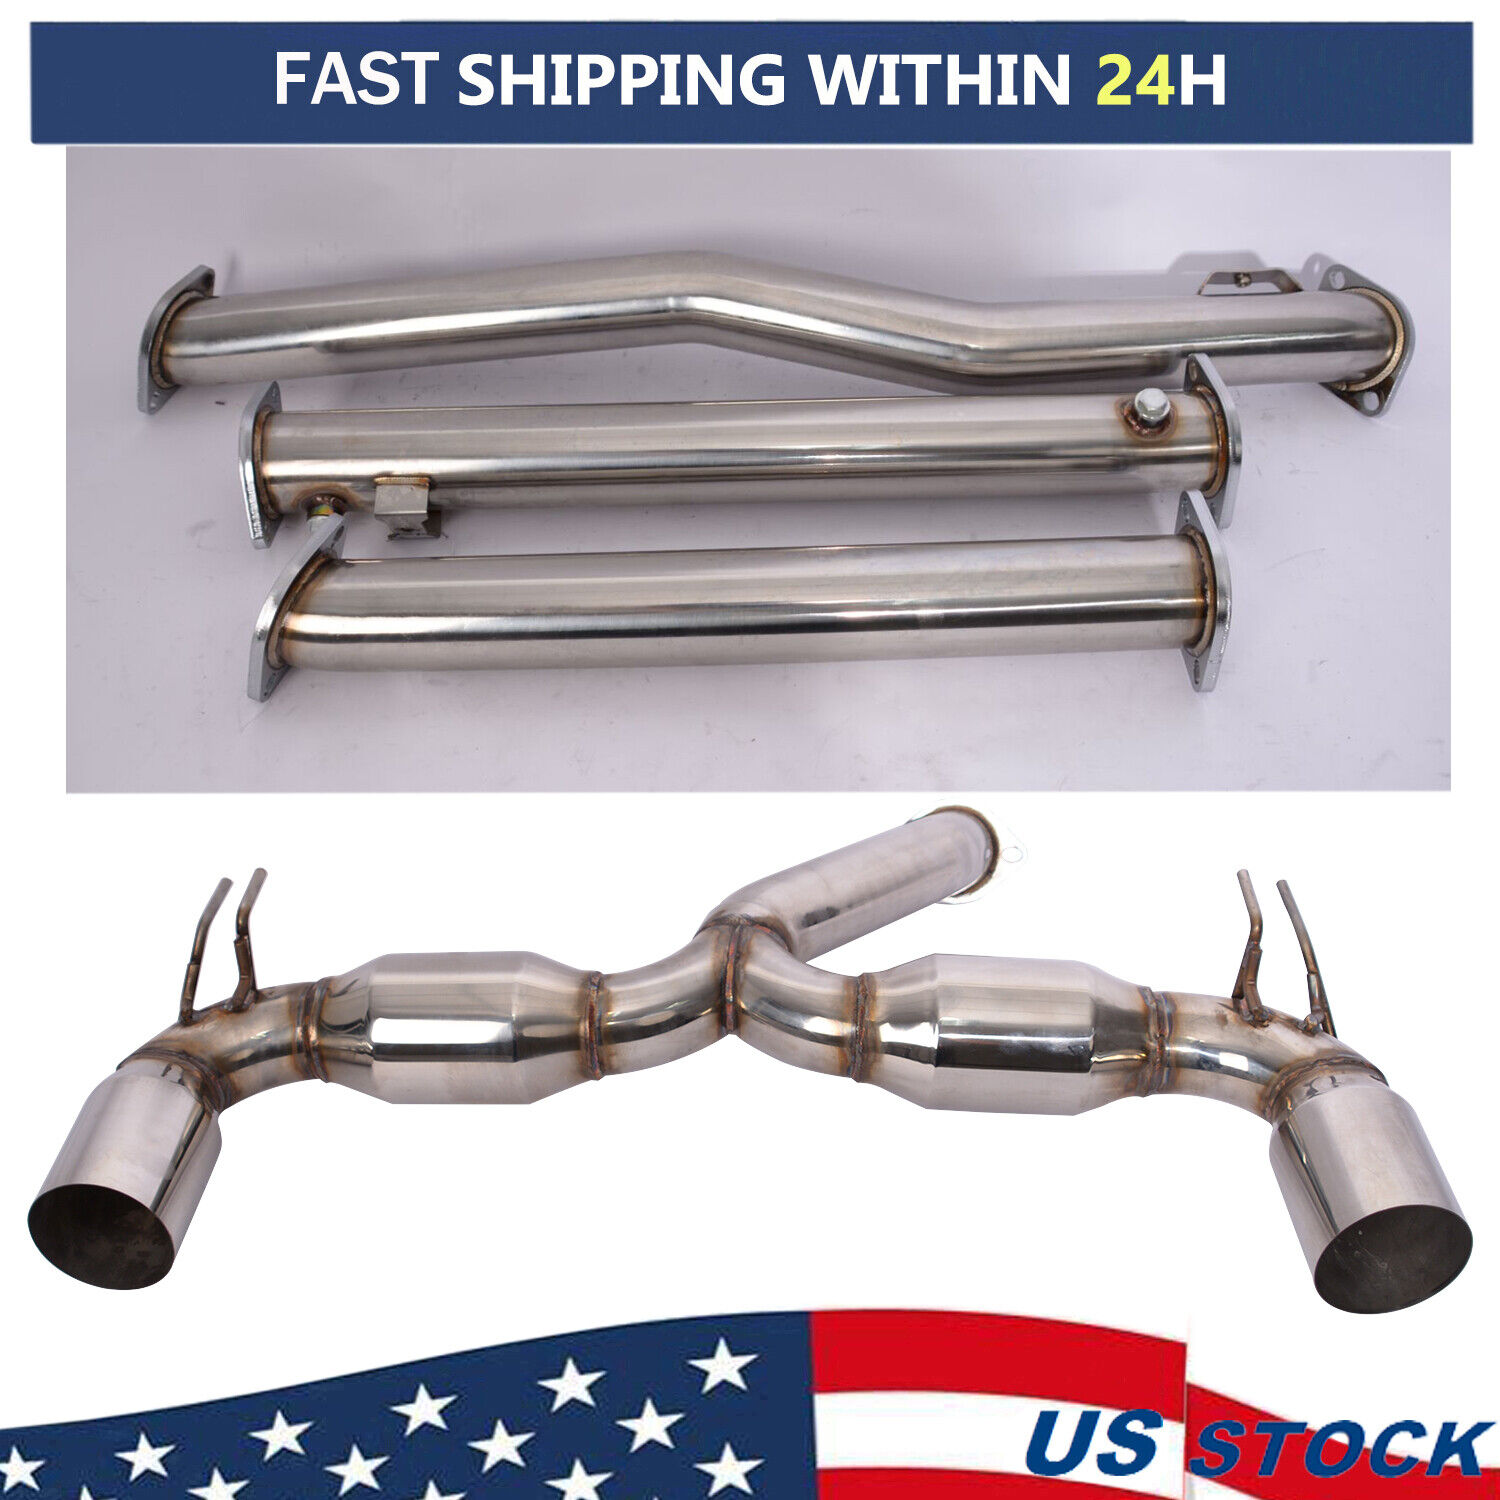 Full Exhaust System Fit For 2008-2015 Mitsubishi Lancer Evolution 10 EVO-X T304